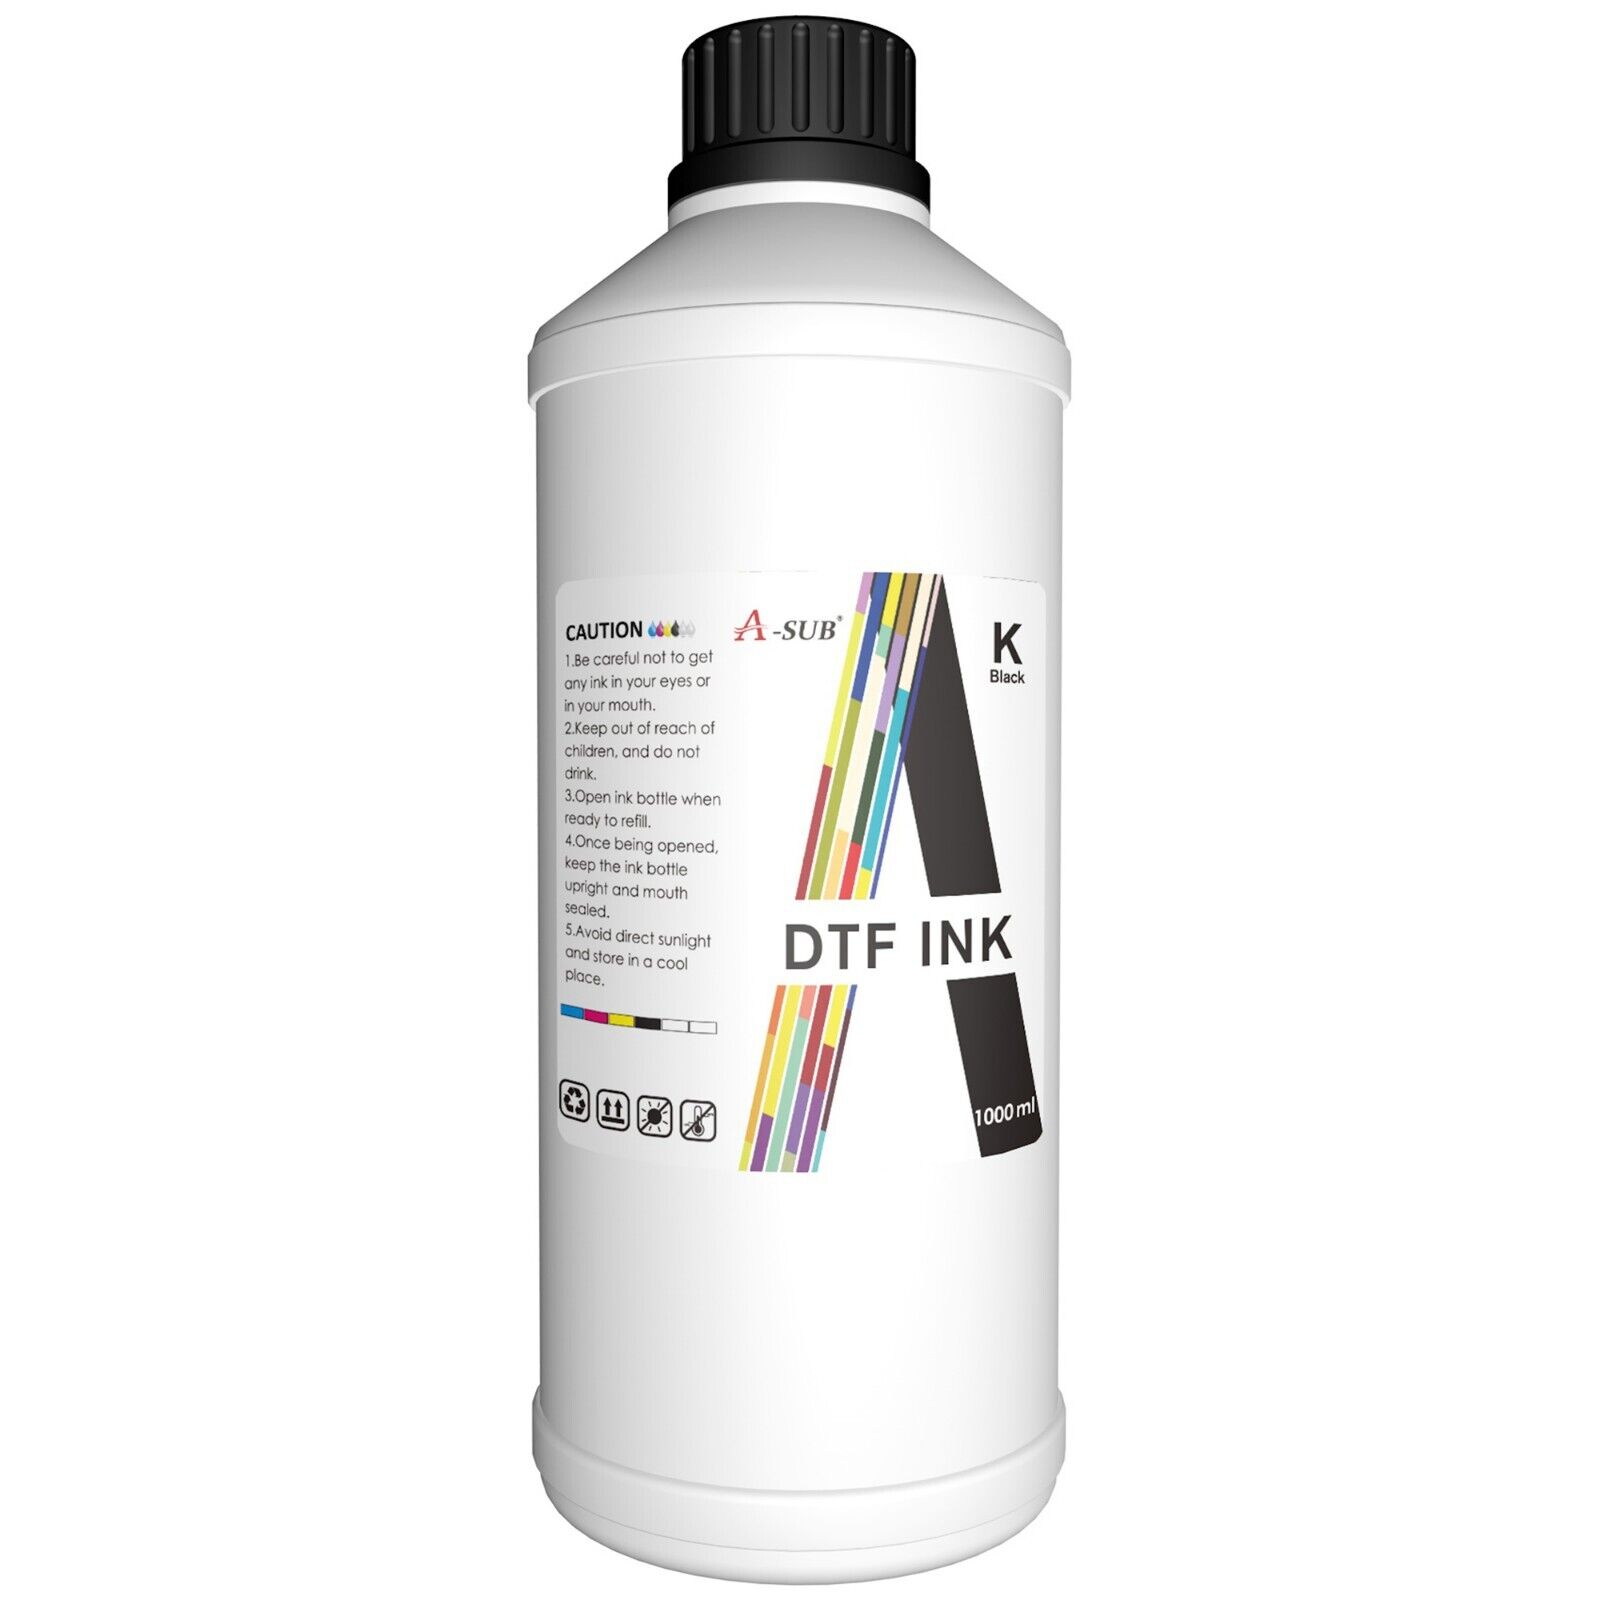 Lot A-SUB Premium DTF INK Refill 1000-6000ML for DTF Epson XP15000 ET-8550 L1800